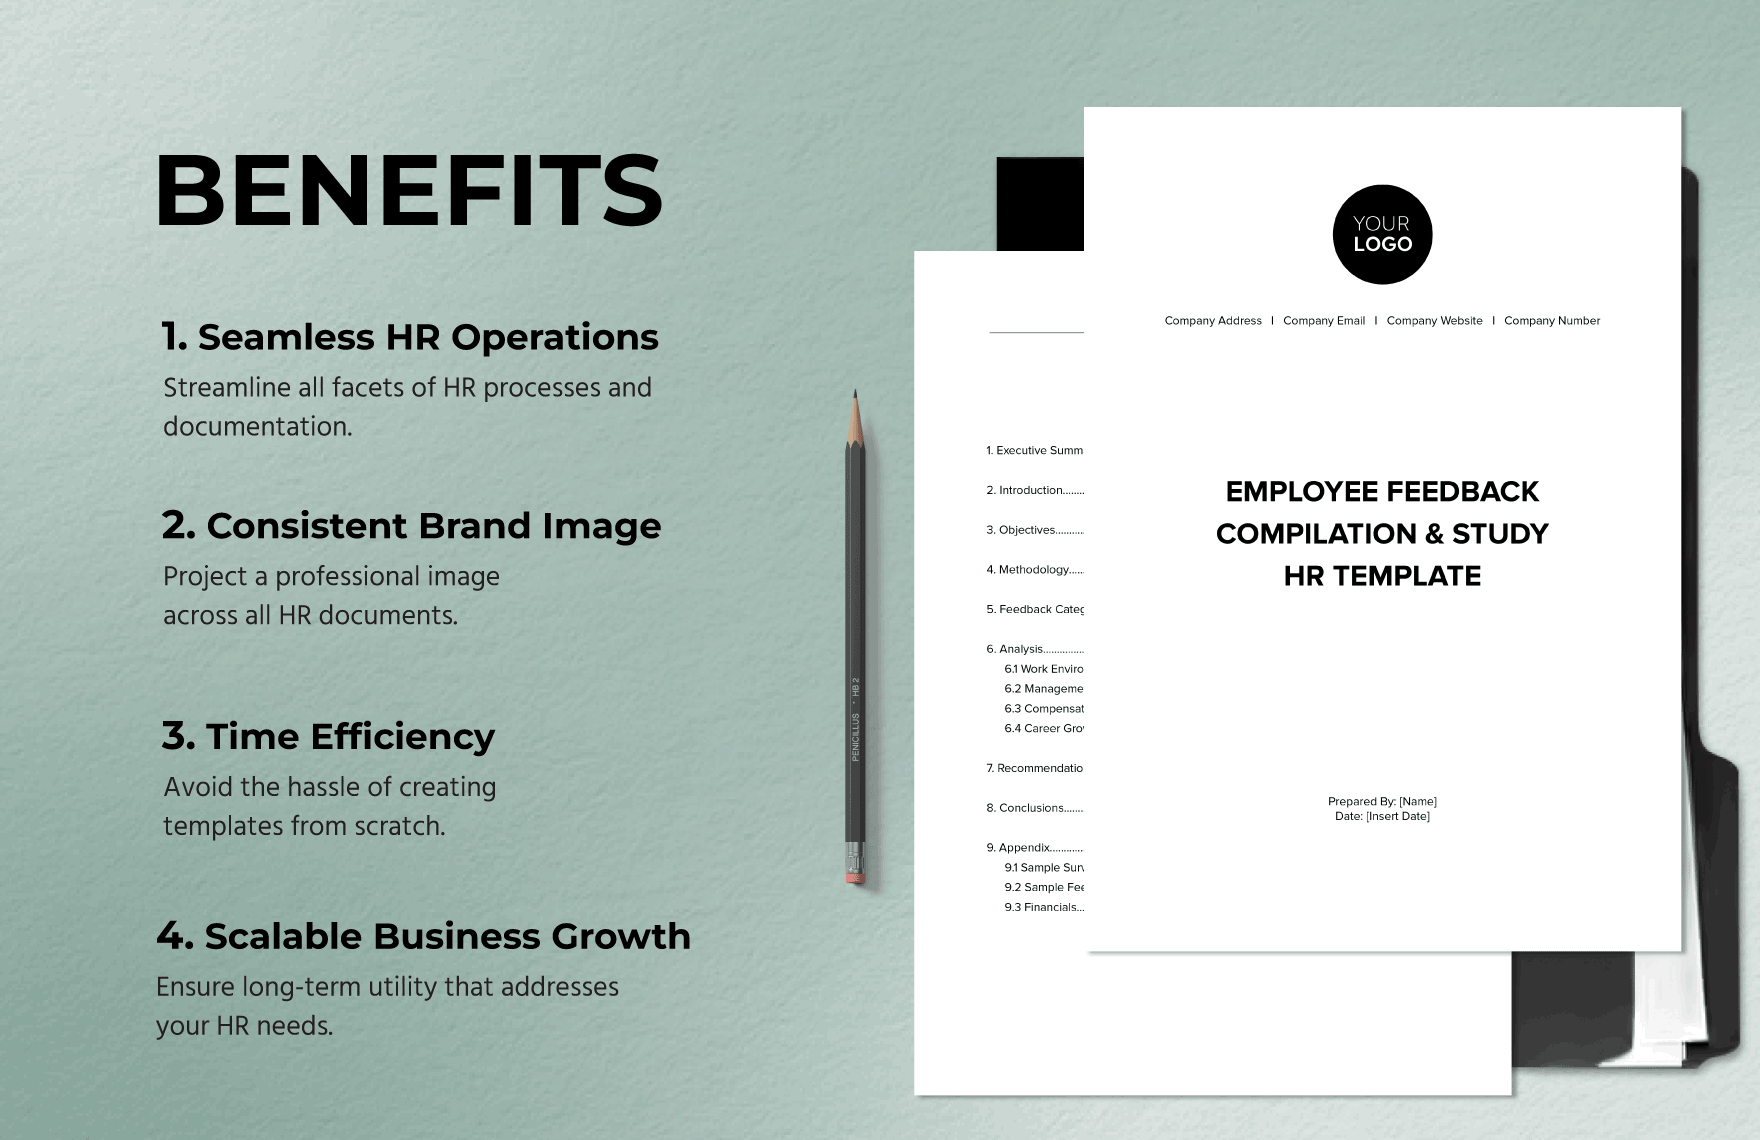 Employee Feedback Compilation & Study HR Template